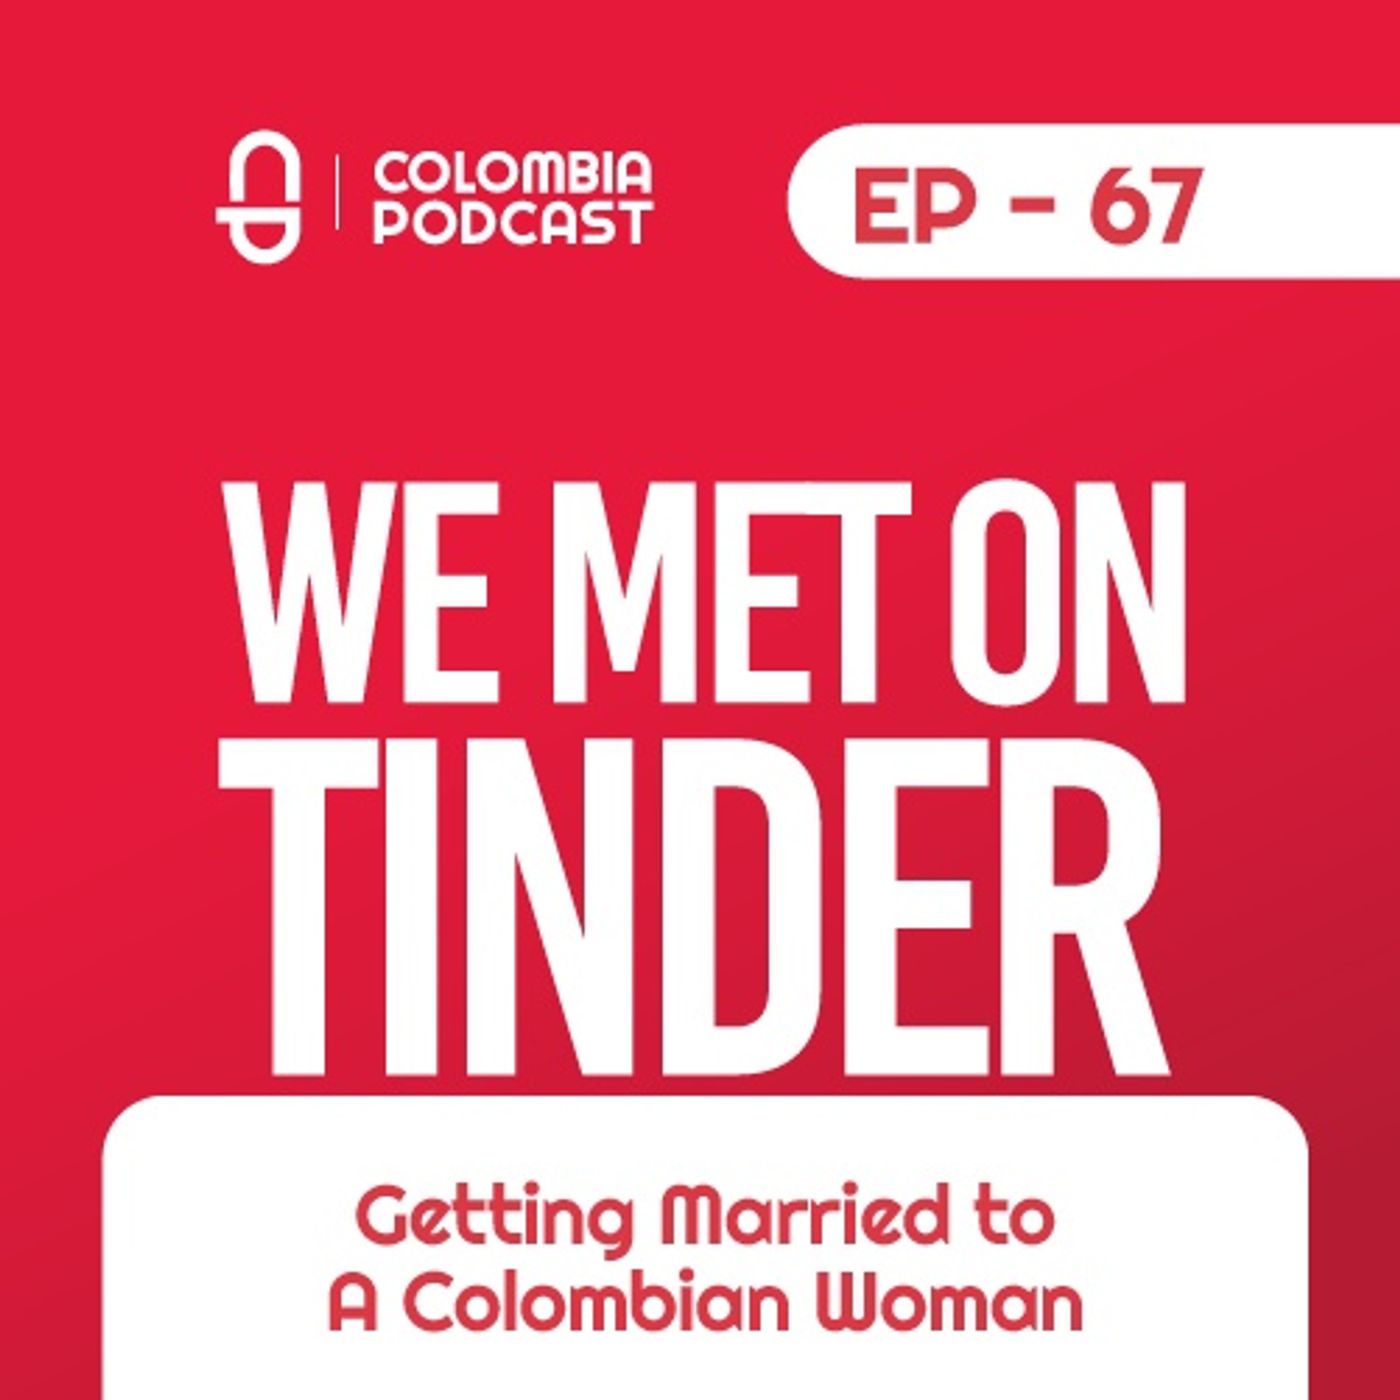 WE MET ON TINDER - Getting Married to Colombian Women (EP 67)